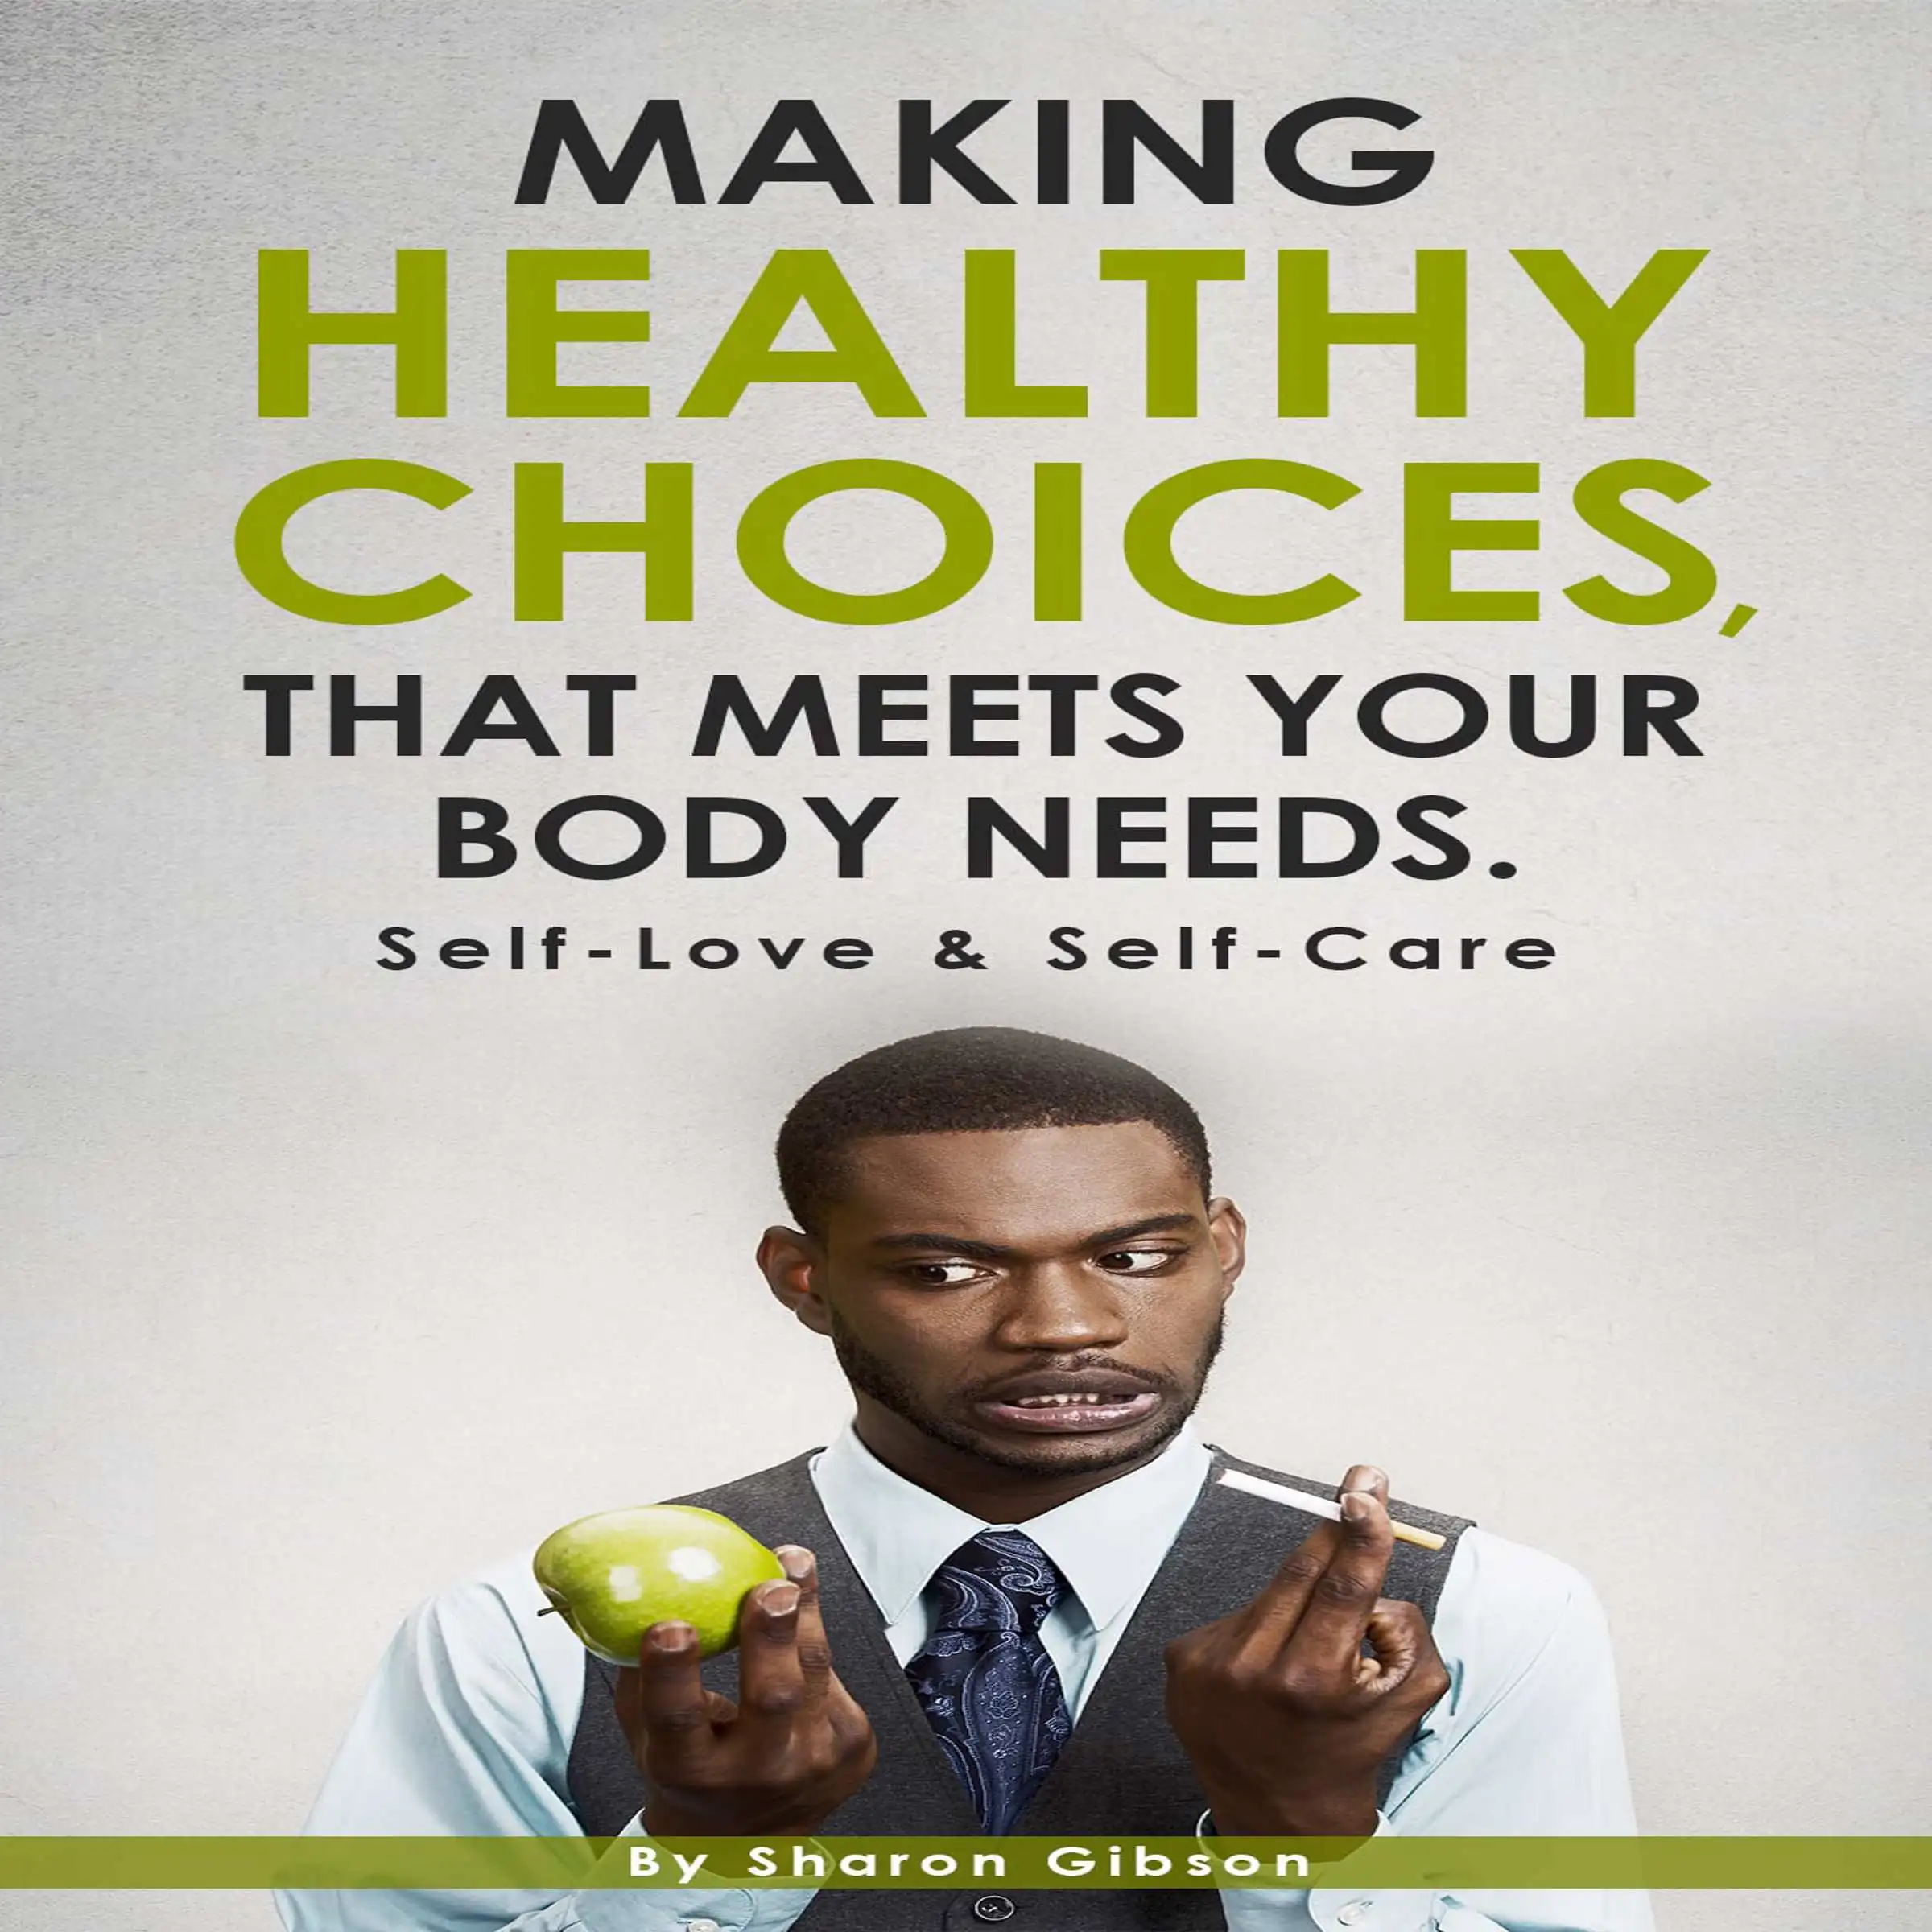 Making Healthy Choices That Meets Your Body Needs. Audiobook by Sharon Gibson